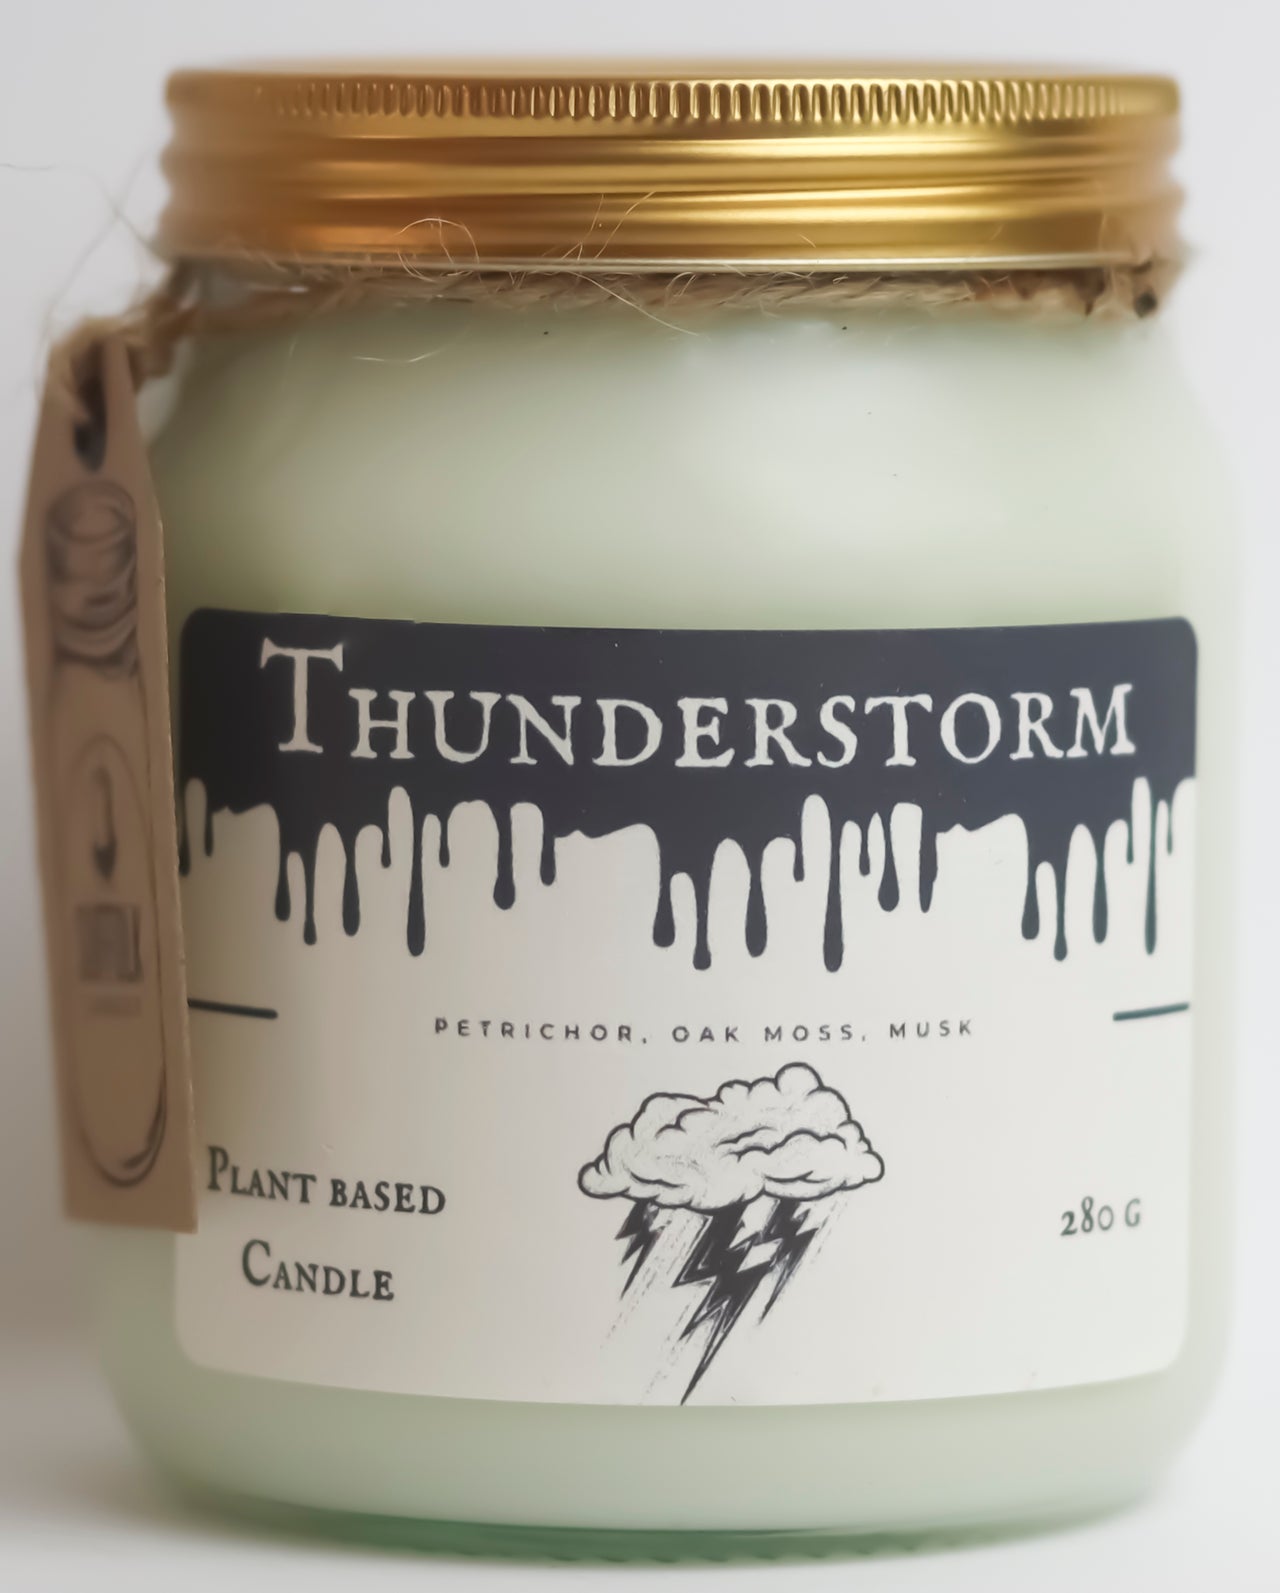 Thunderstorm Candle